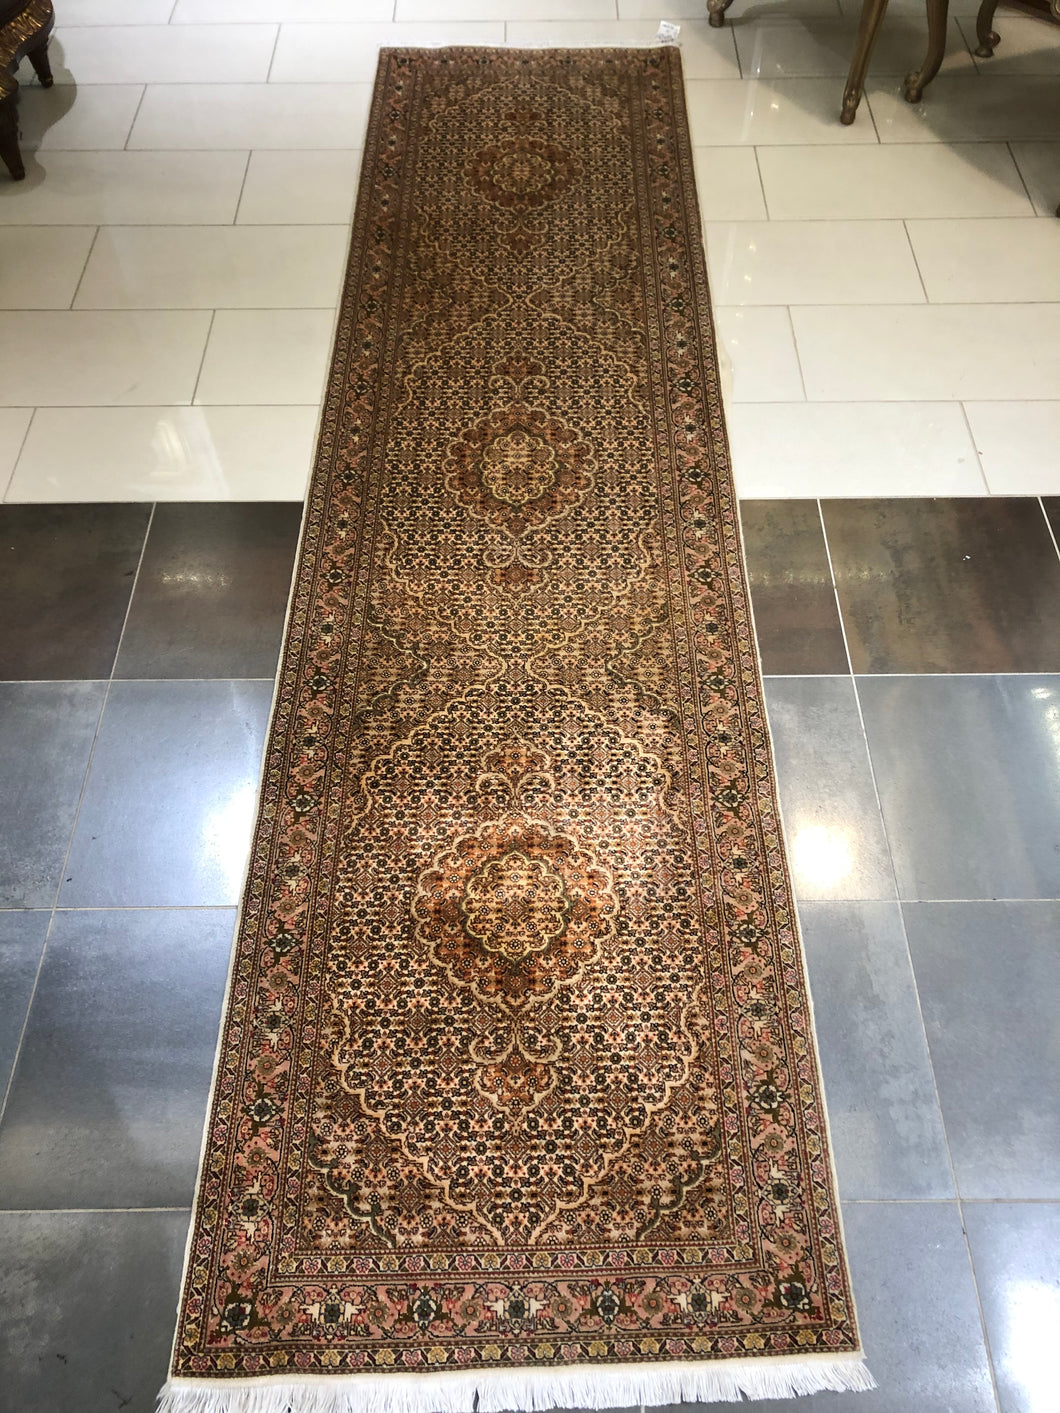 Tabriz Rug 2.7 X 10.3 $4000 each - Sold Out of Stock